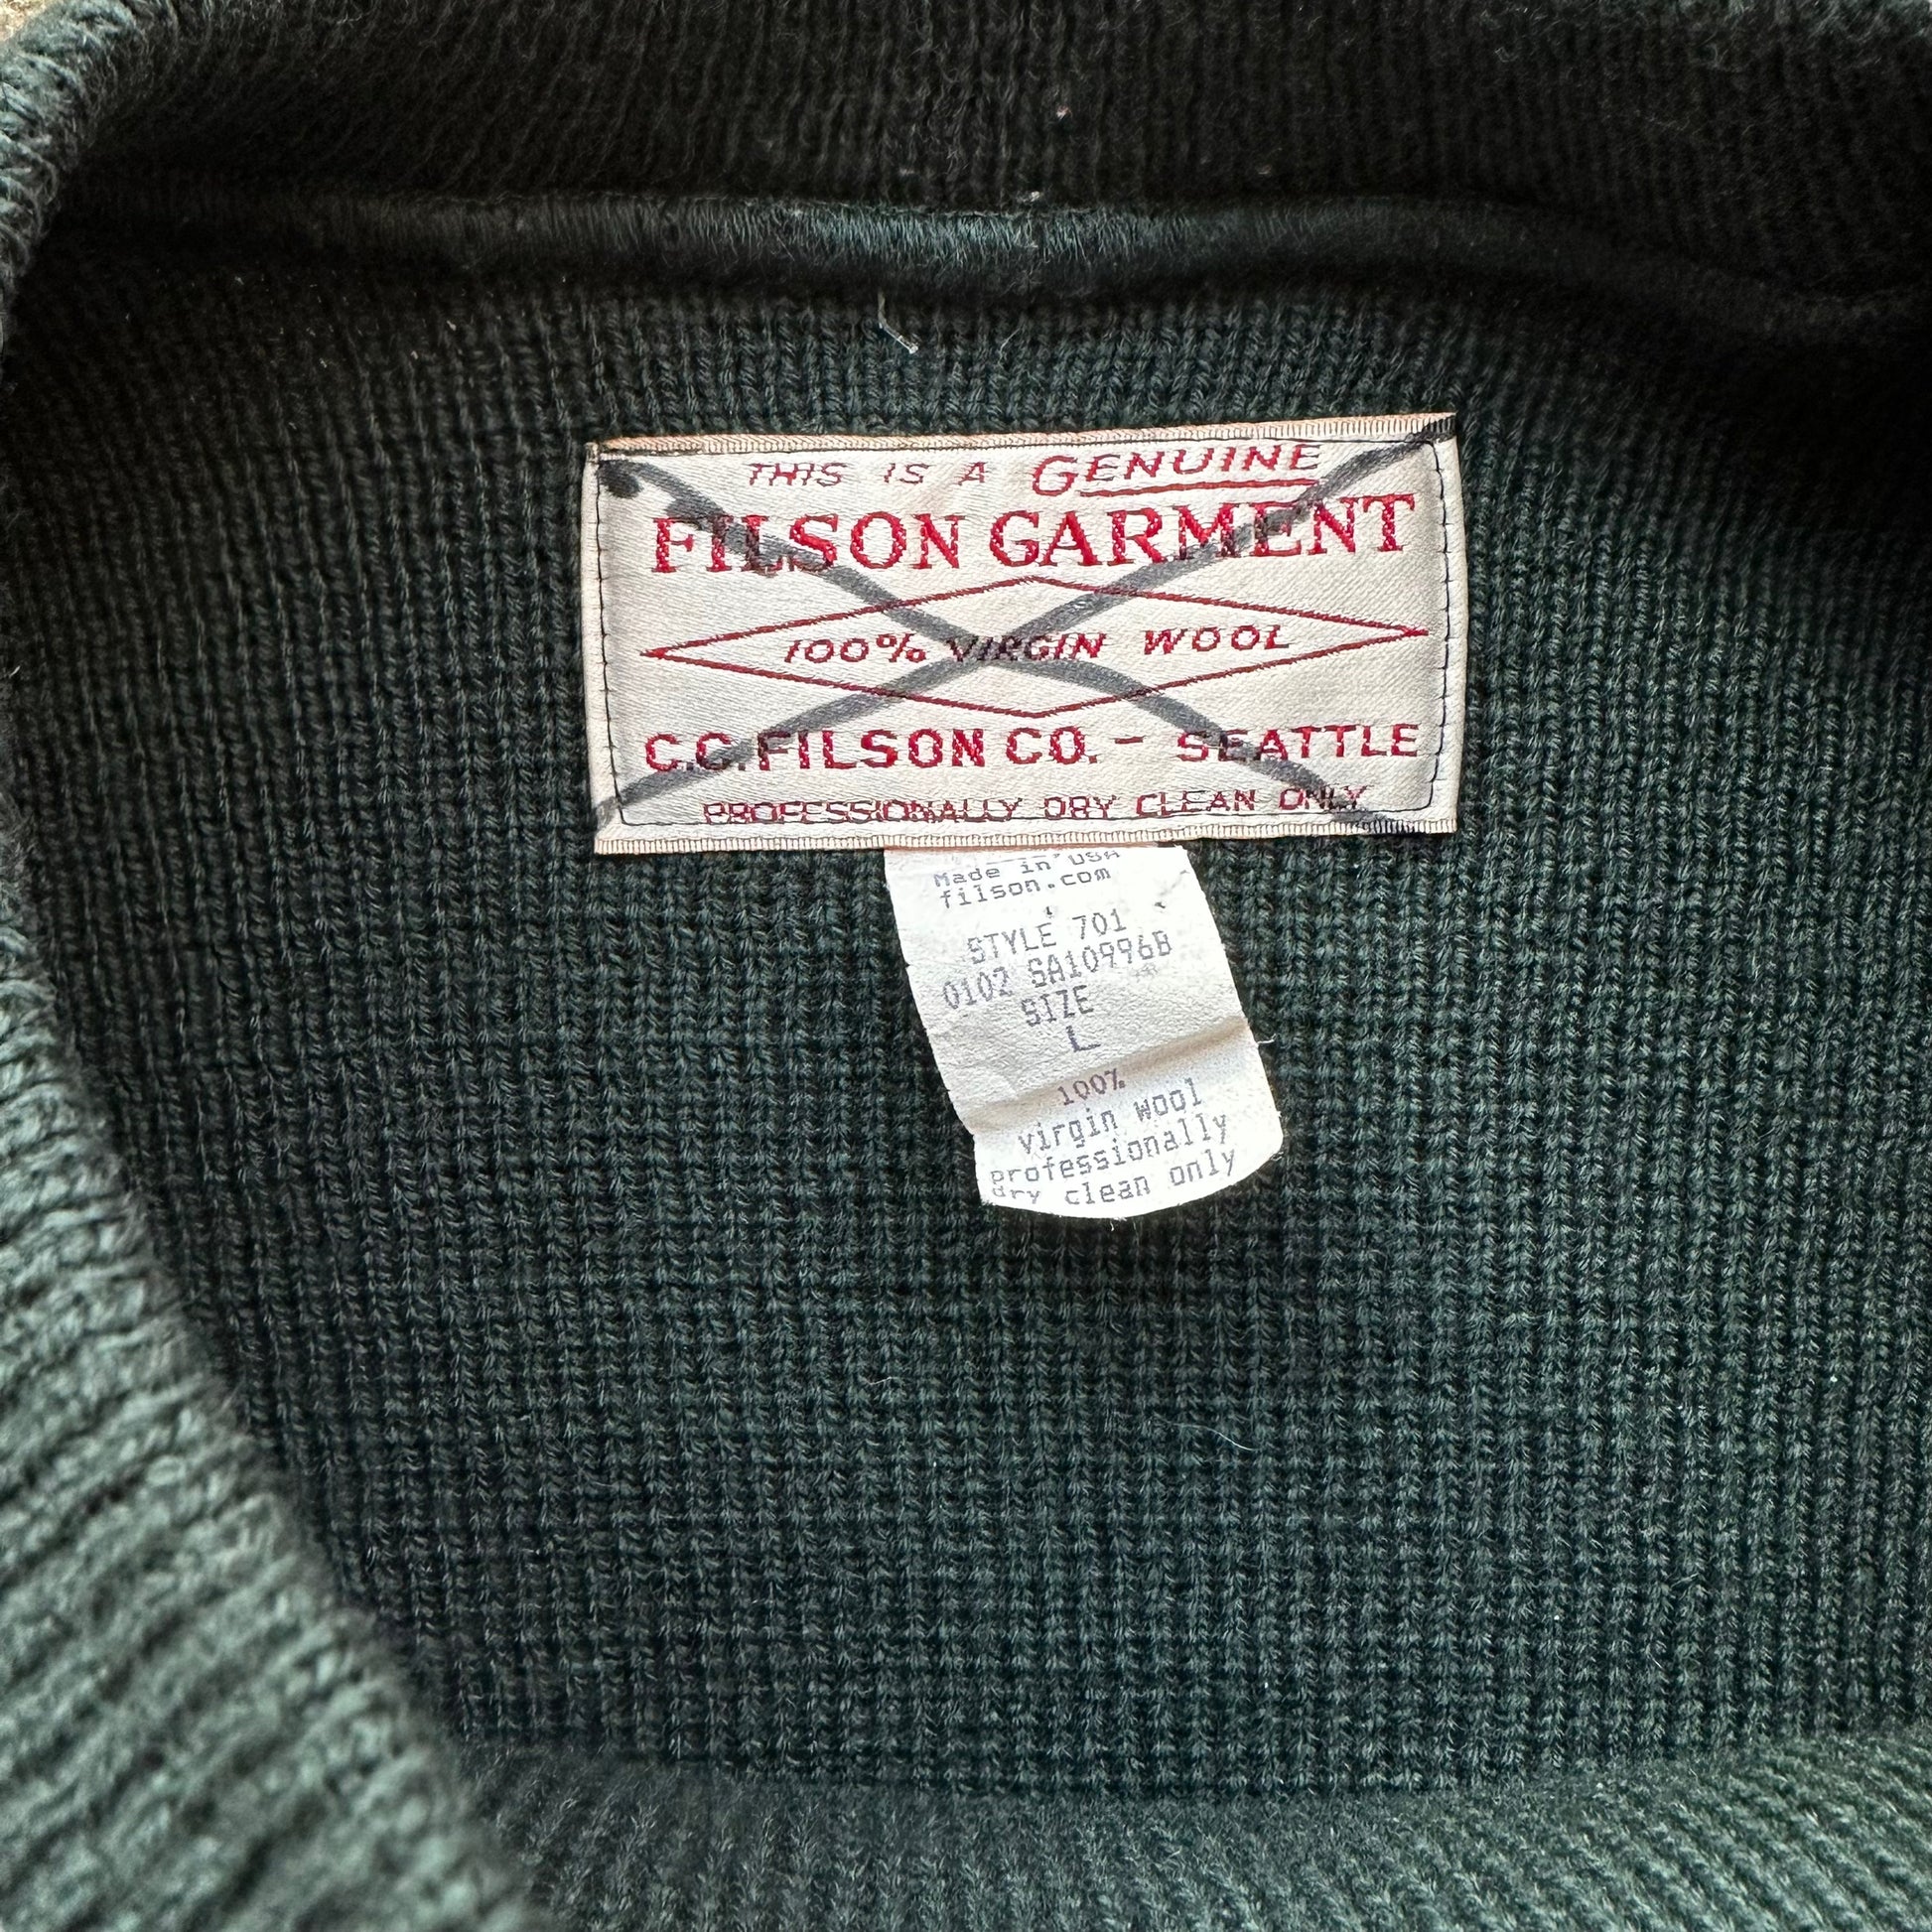 Tag View of Filson Guide Sweater SZ L |  Barn Owl Vintage Goods | Vintage Filson Workwear Sweaters Seattle